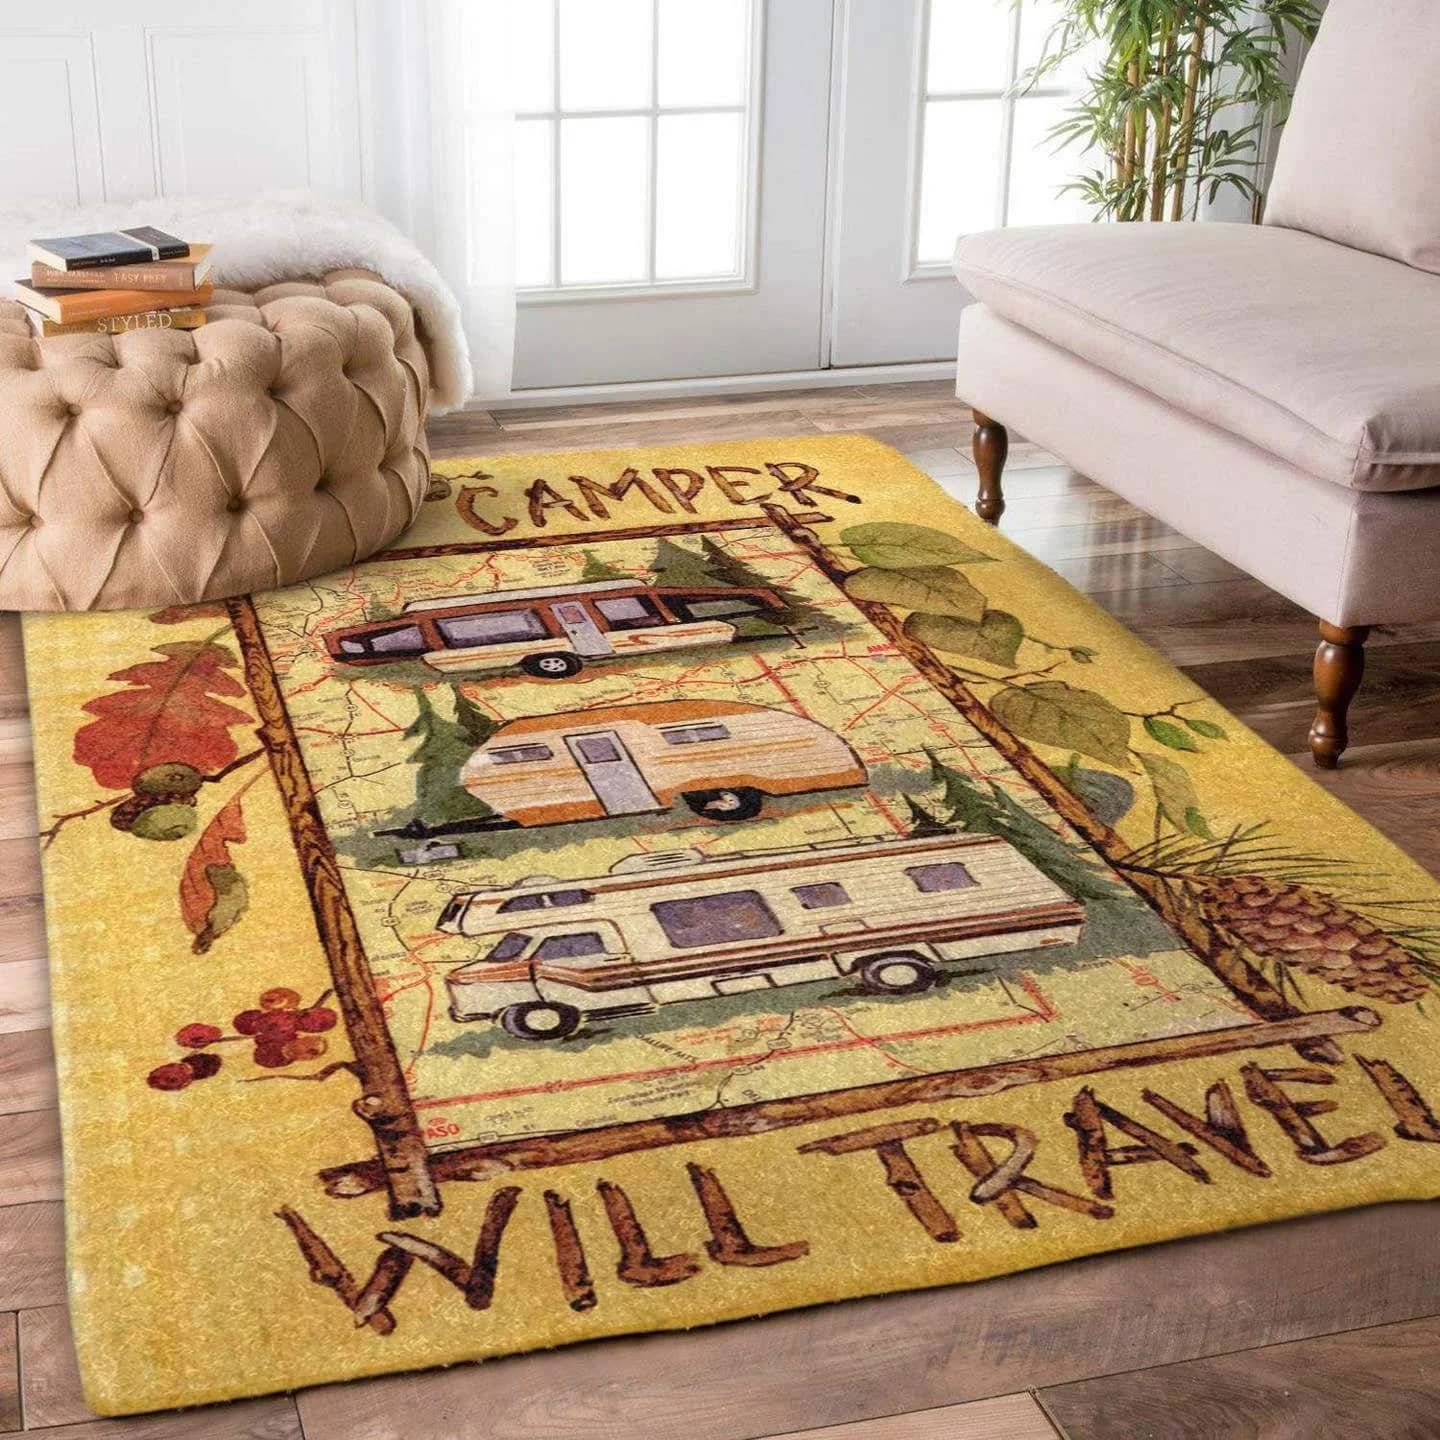 Camping Limited Edition Amazon Best Seller Sku 264985 Rug